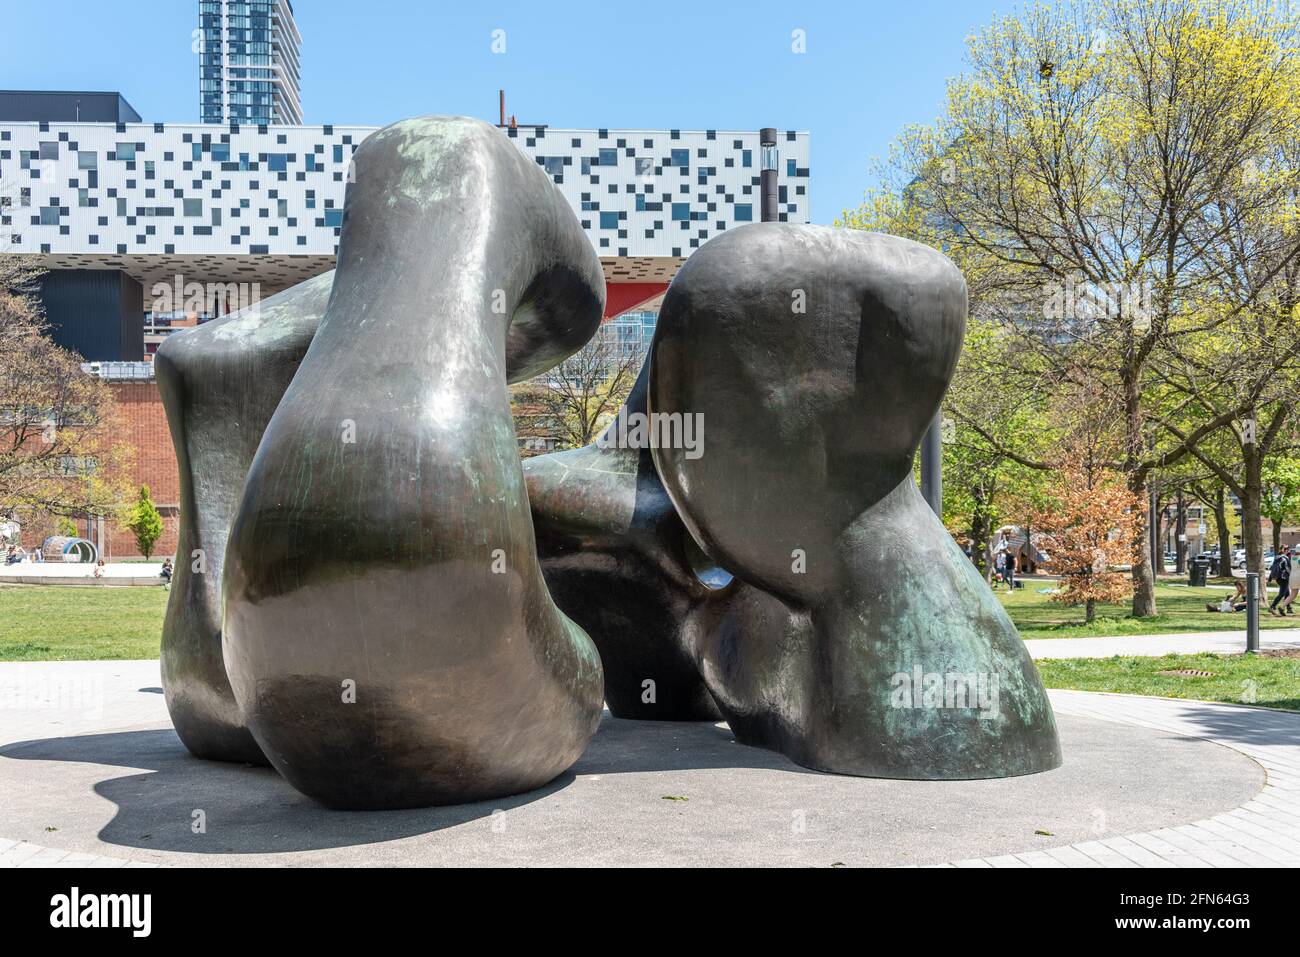 The sculpture named 'Large Two Forms' by Henry Moore. It is located in The Grange Park behind the Art Gallery of Ontario (AGO) in Toronto, Canada Stock Photo